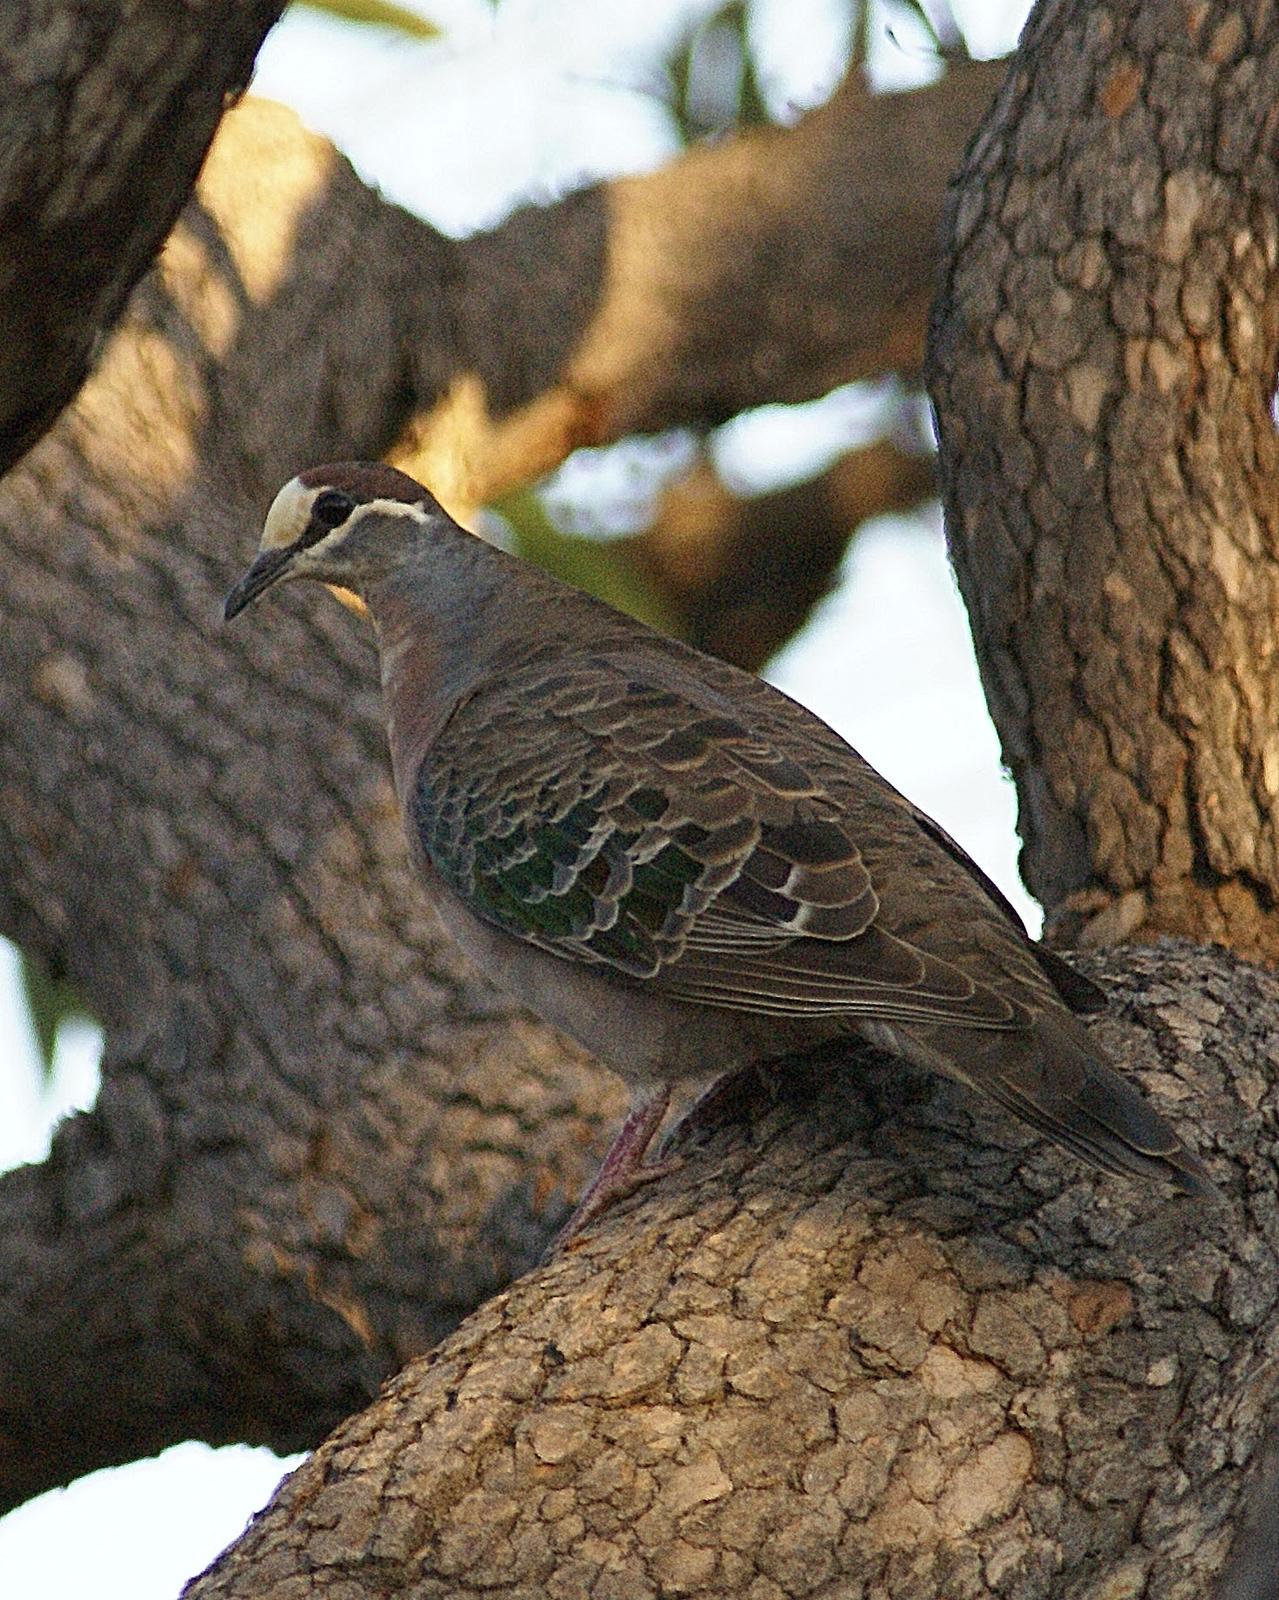 Common Bronzewing Photo by Steve Percival